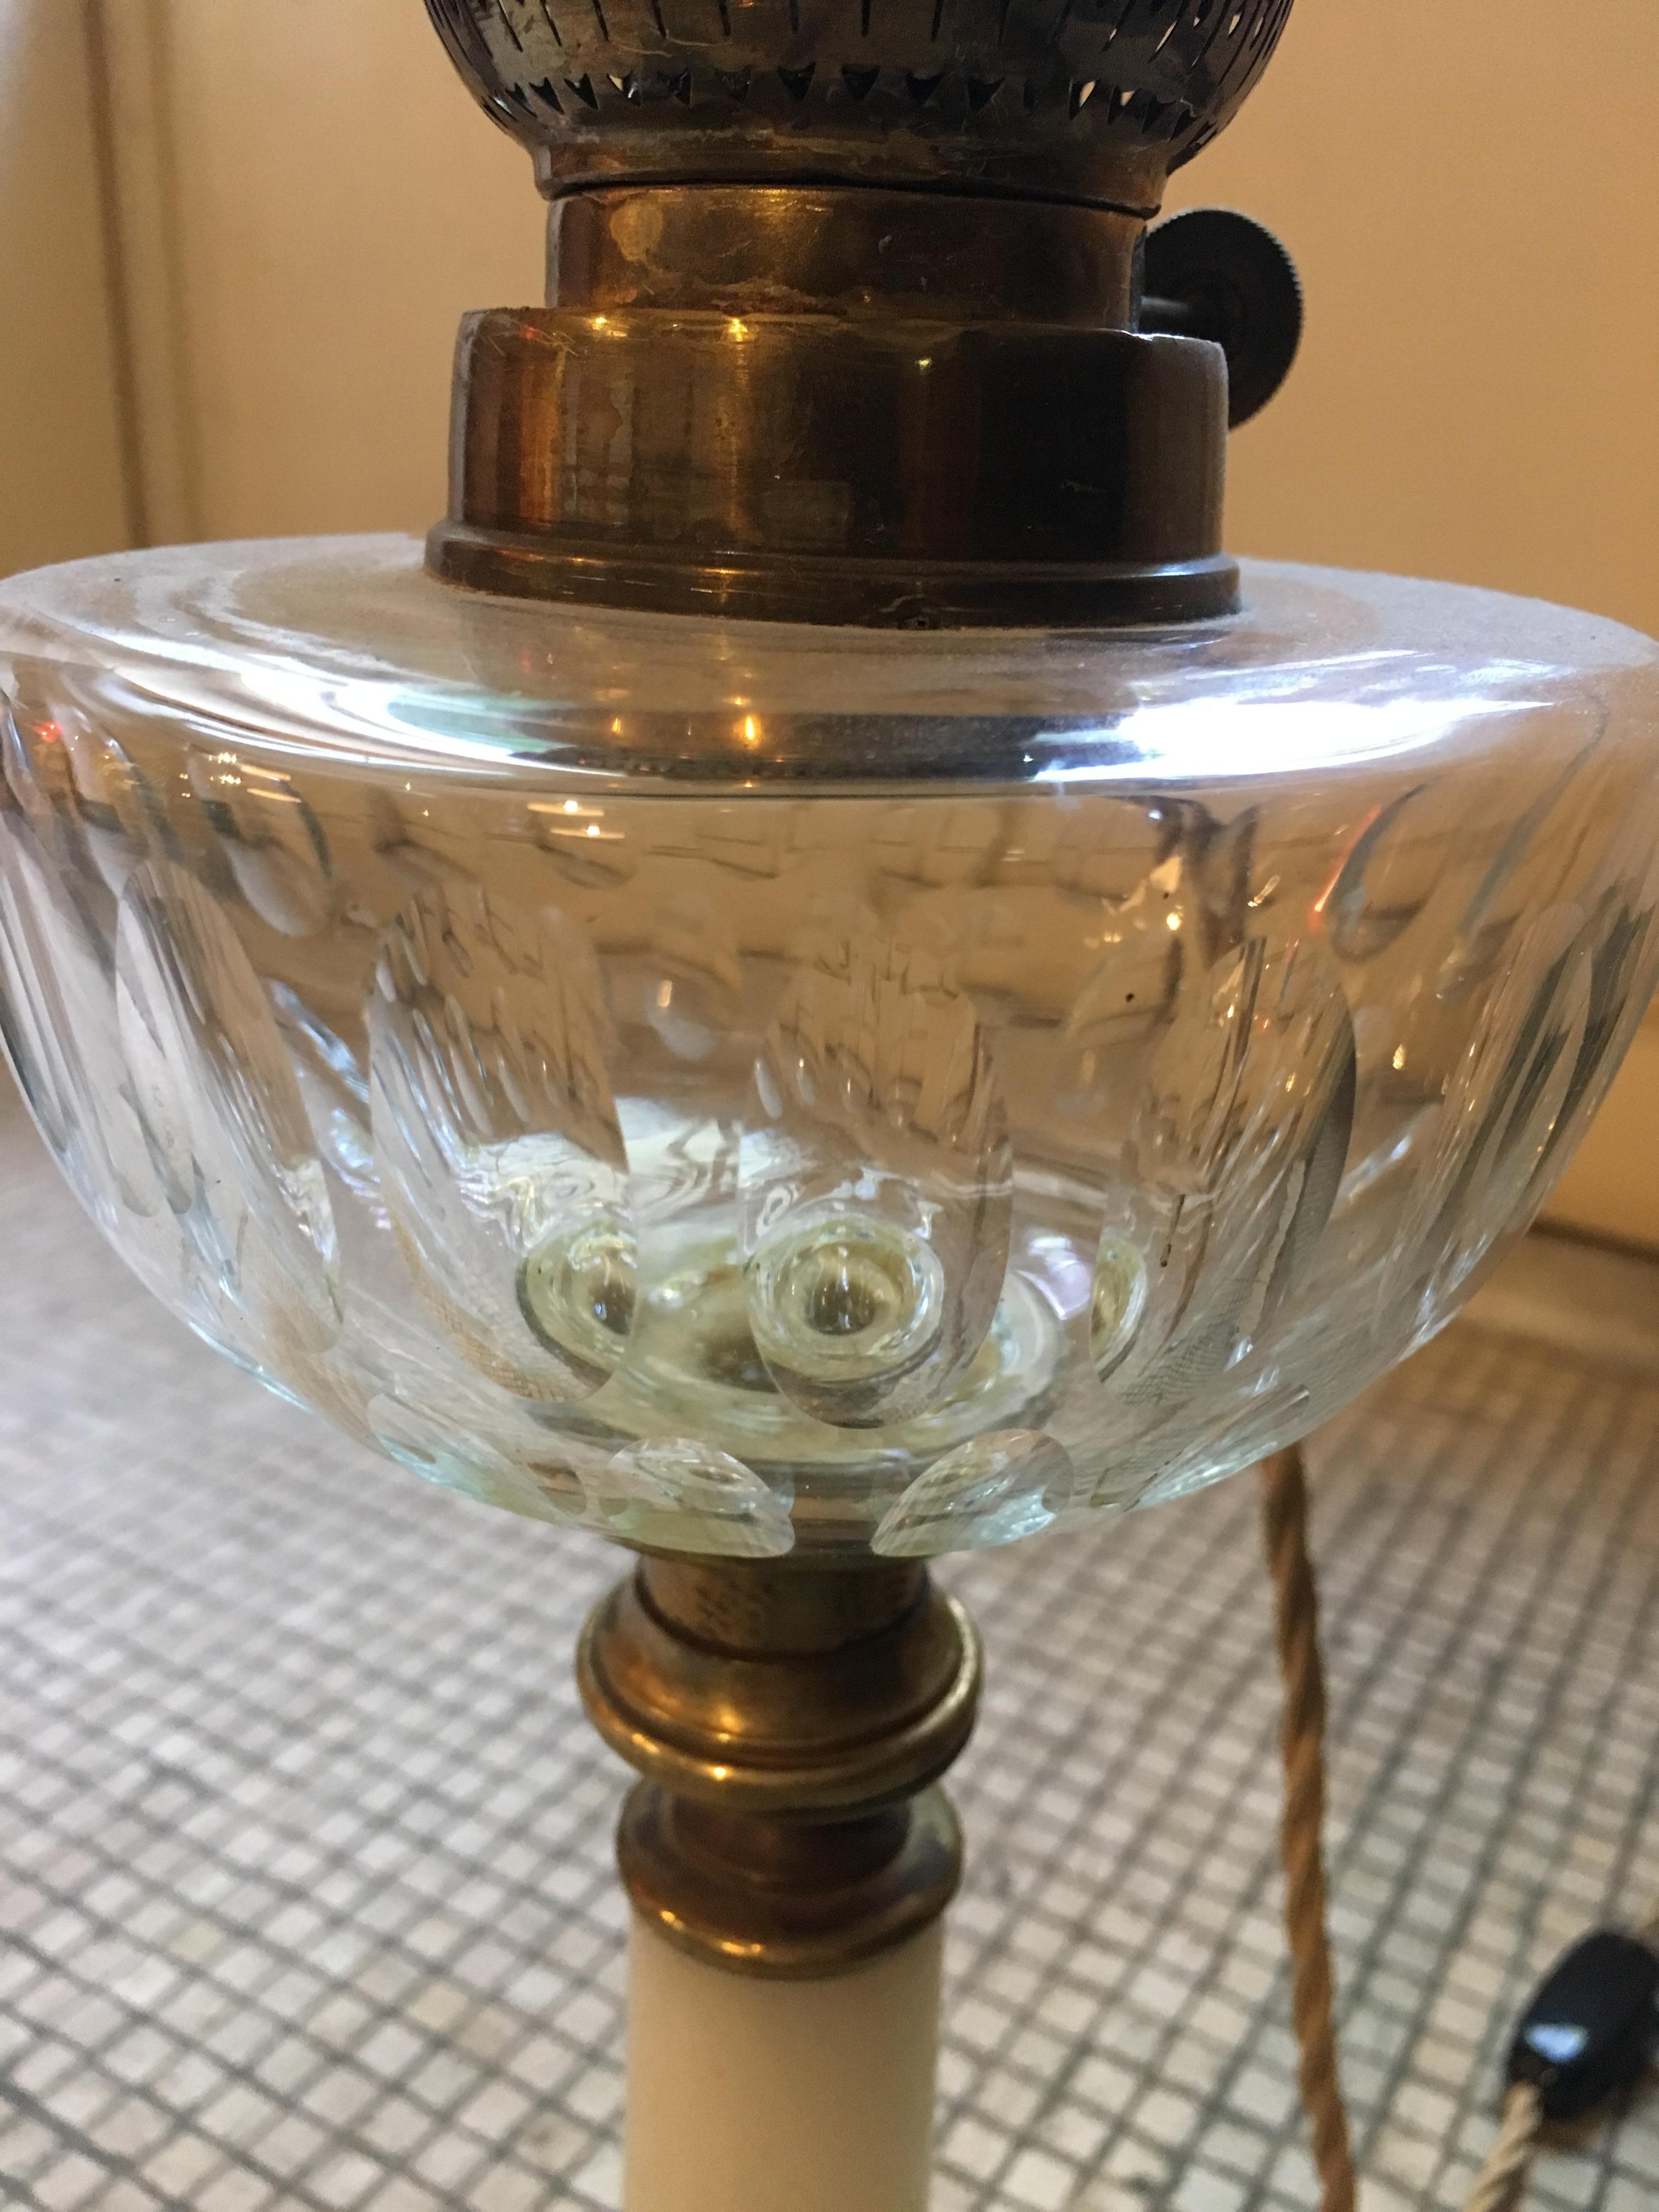 19th Century French Oil Lamp with Glass and Marble Converted into Electric Lamp (Messing) im Angebot